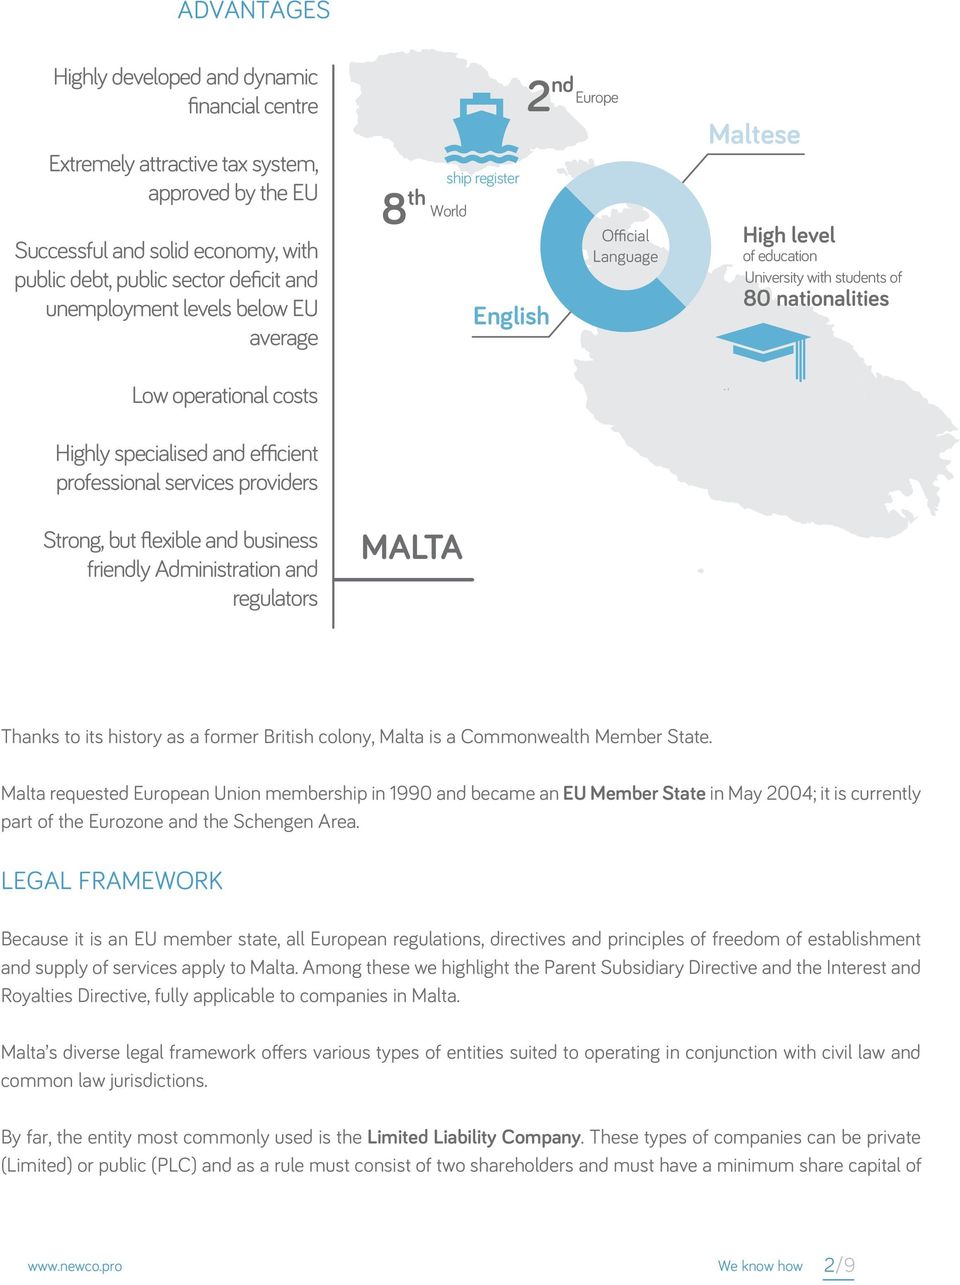 MALTA ship register English 2 nd Europe Official Language Maltese High level of education University with students of 80 nationalities Thanks to its history as a former British colony, Malta is a